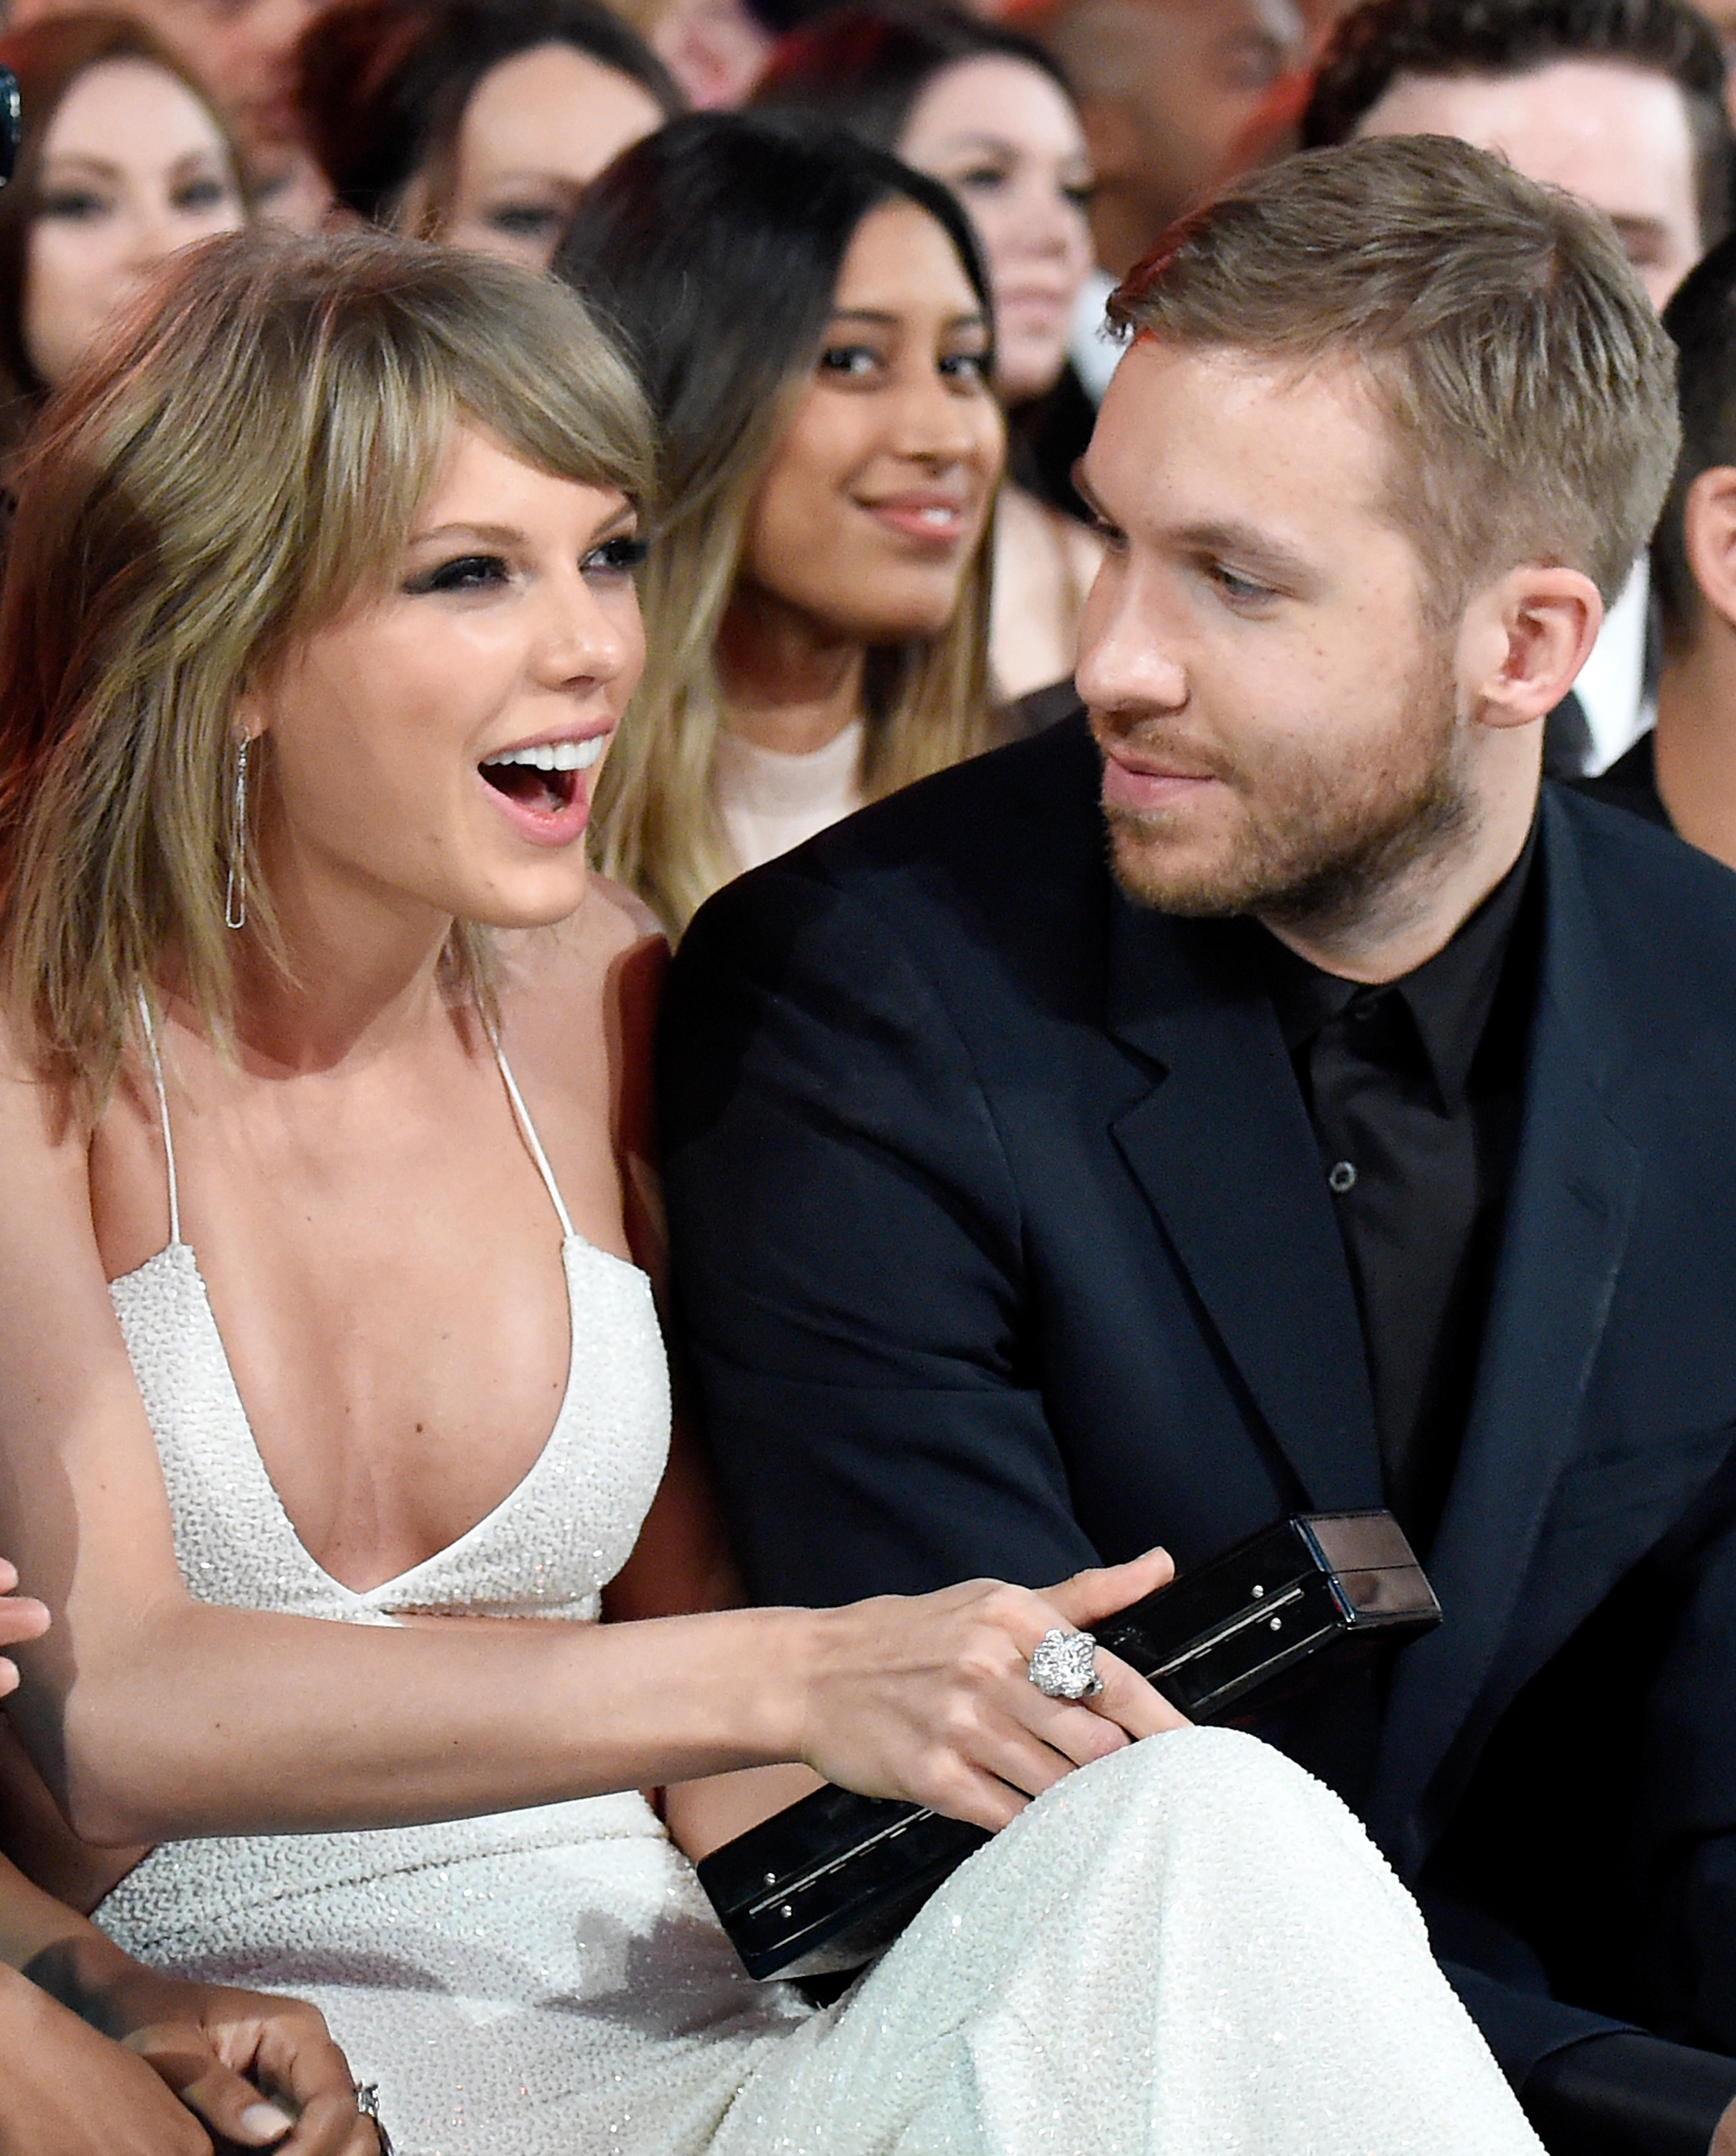 Taylor and Calvin dated from 2015 to 2016